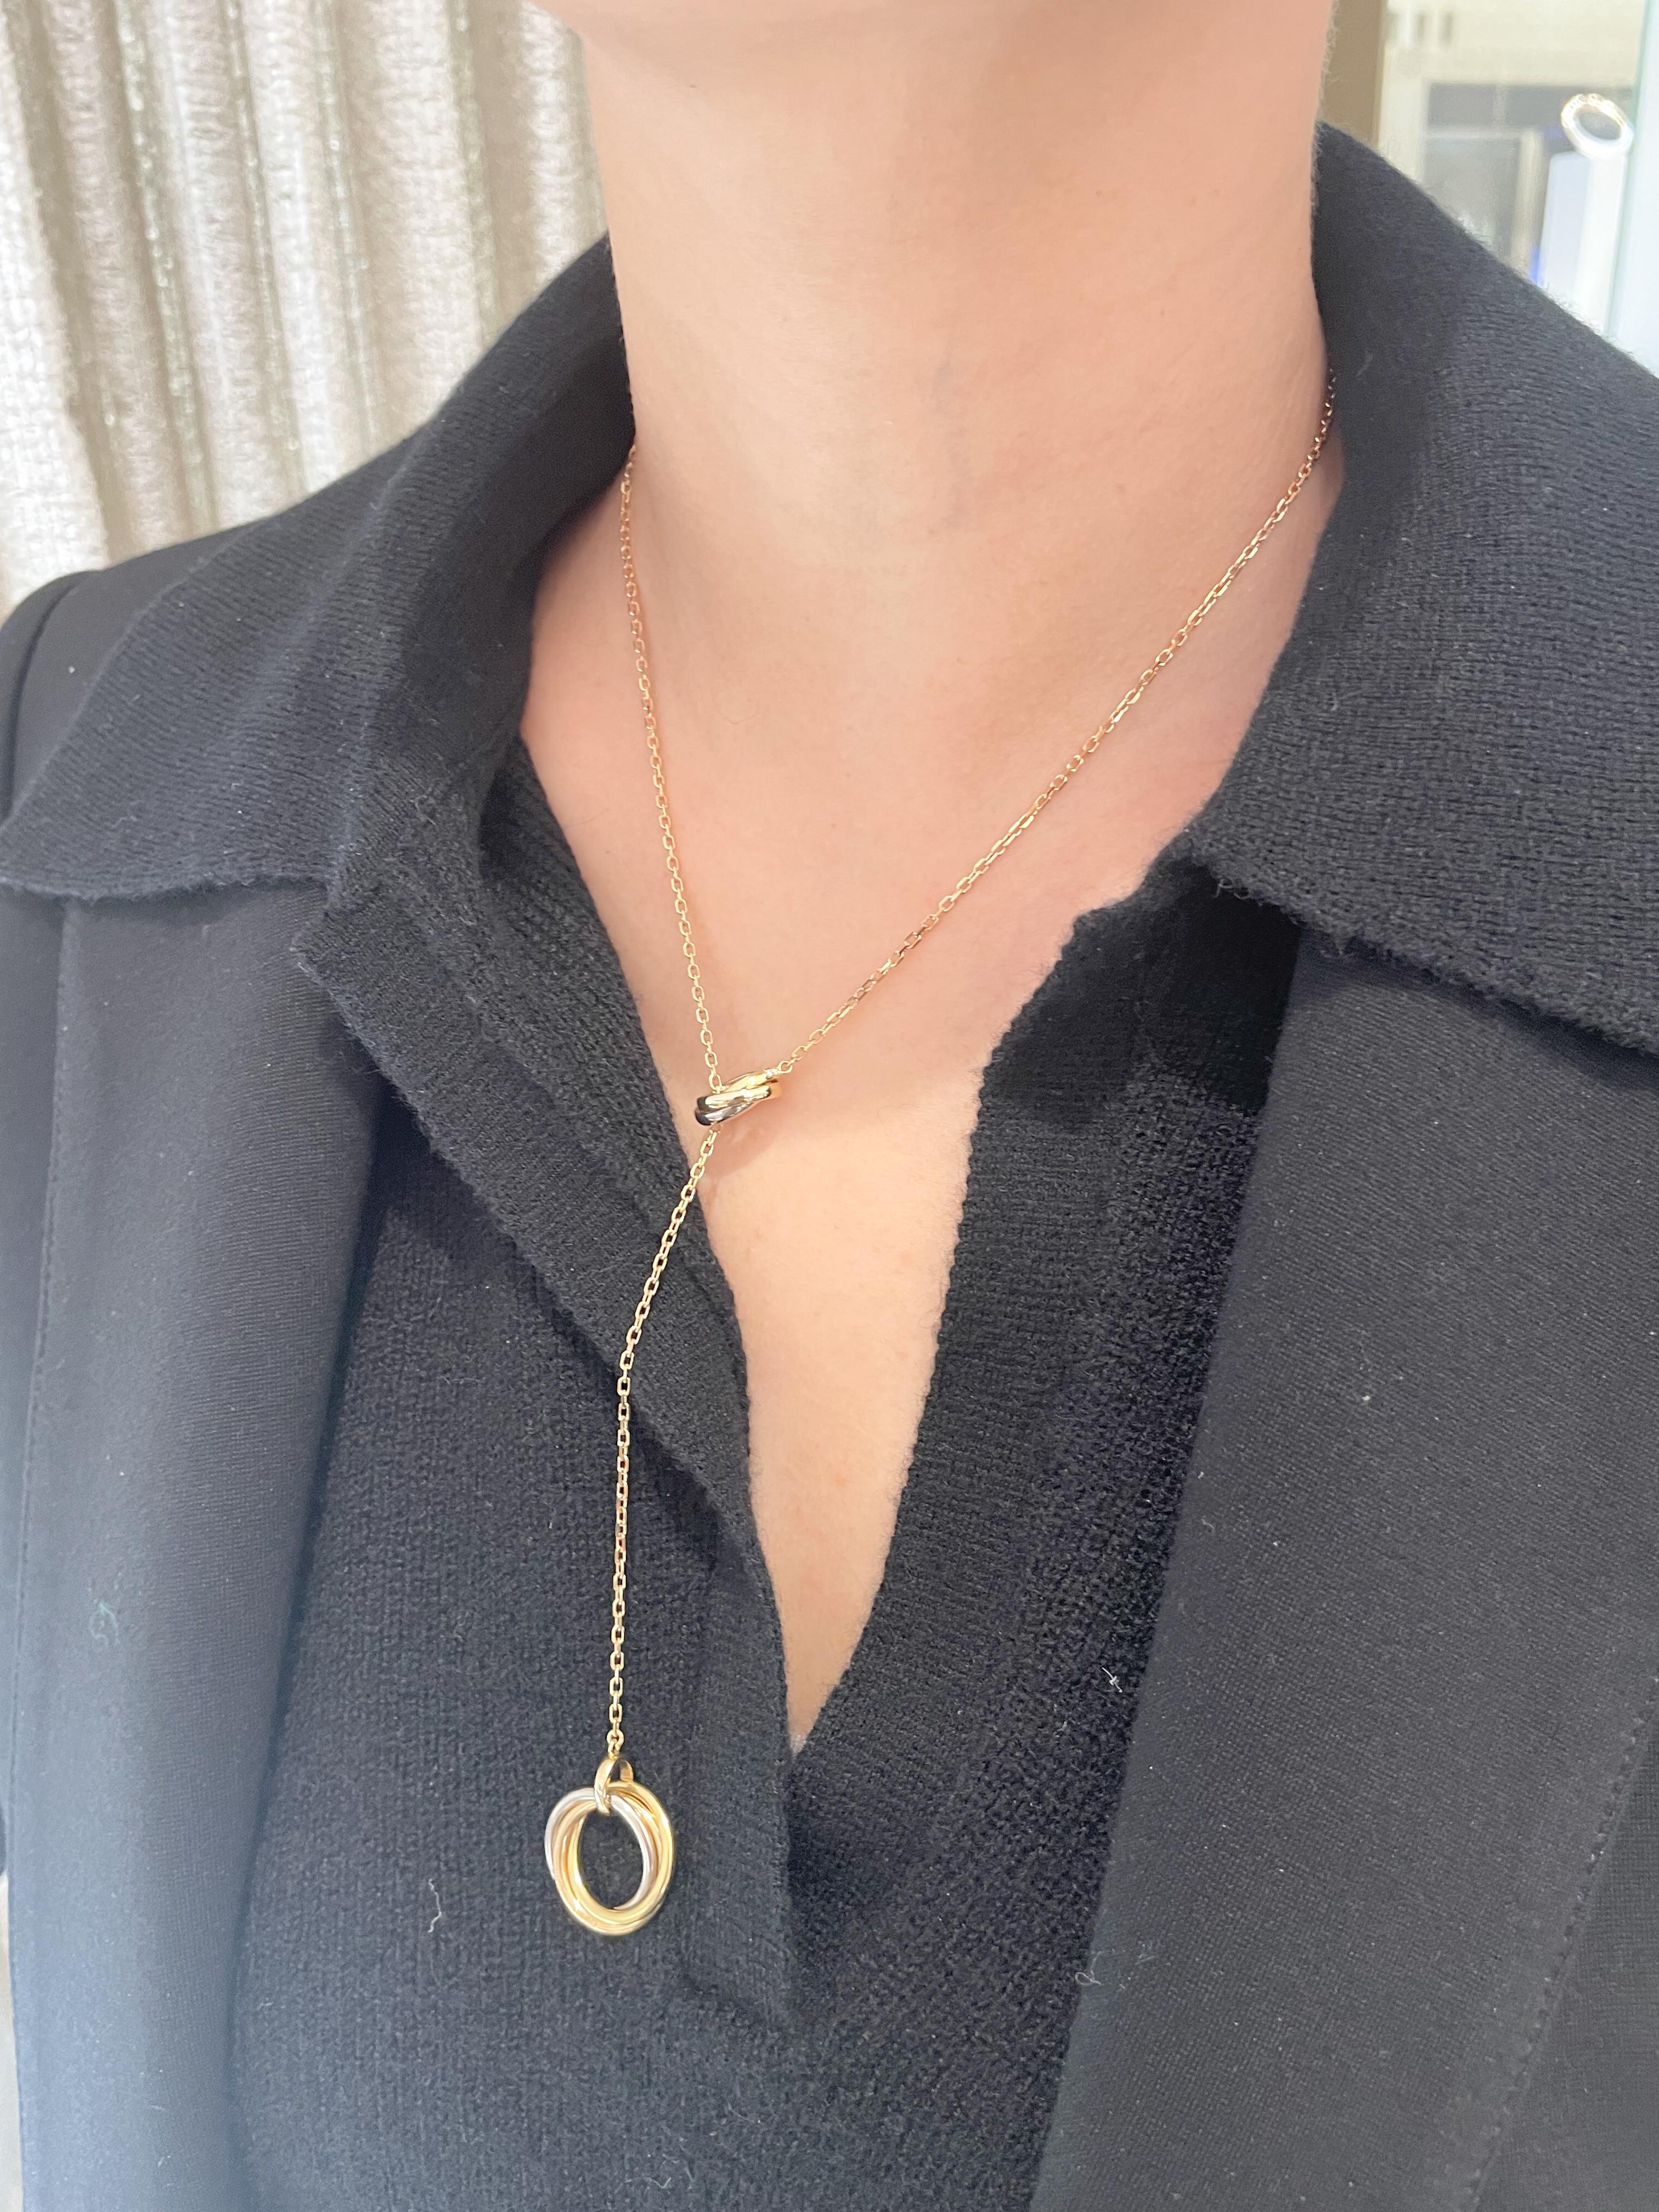 From designer Cartier, circa 2000’s, 18 karat yellow, white, and rose gold Trinity lariat necklace. This necklace is crafted with small oval trinity rings on one end of the necklace and round trinity rings on the other end. Both rings feature 53